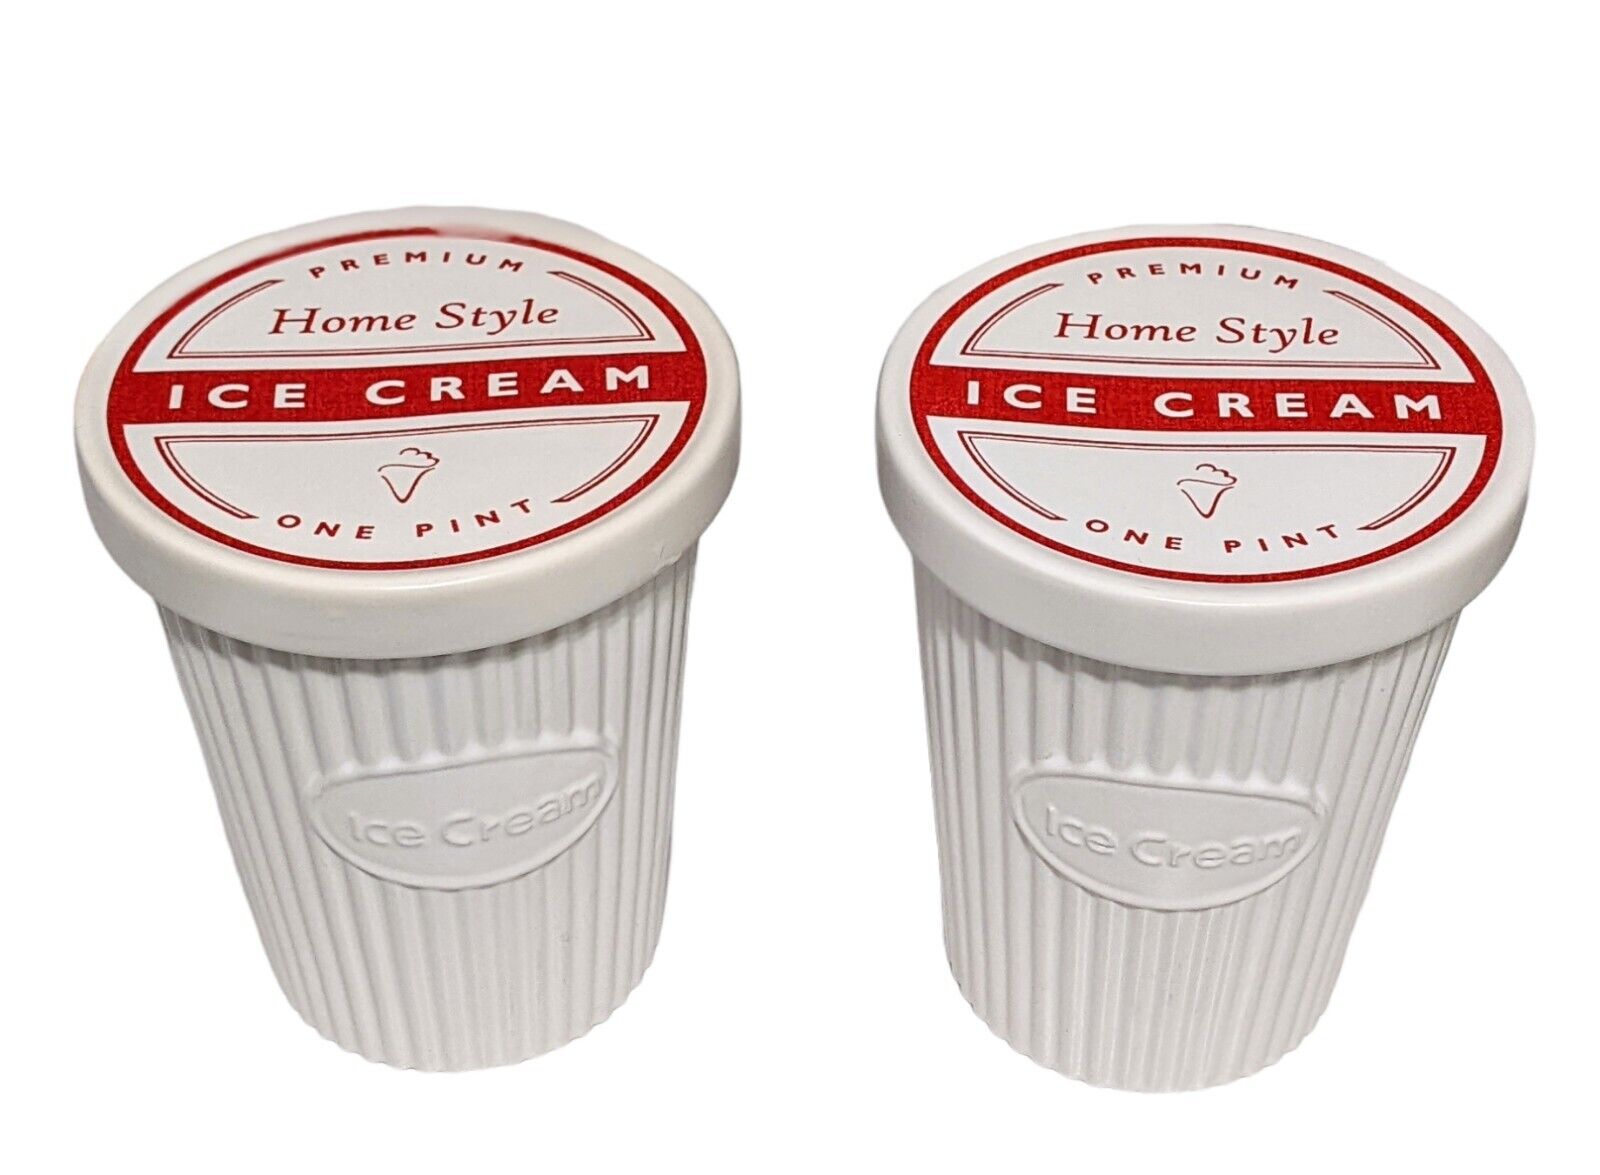 2 Williams-Sonoma ICE CREAM Containers w/ Lids Homestyle Ceramic Ribbed 1 Pint 